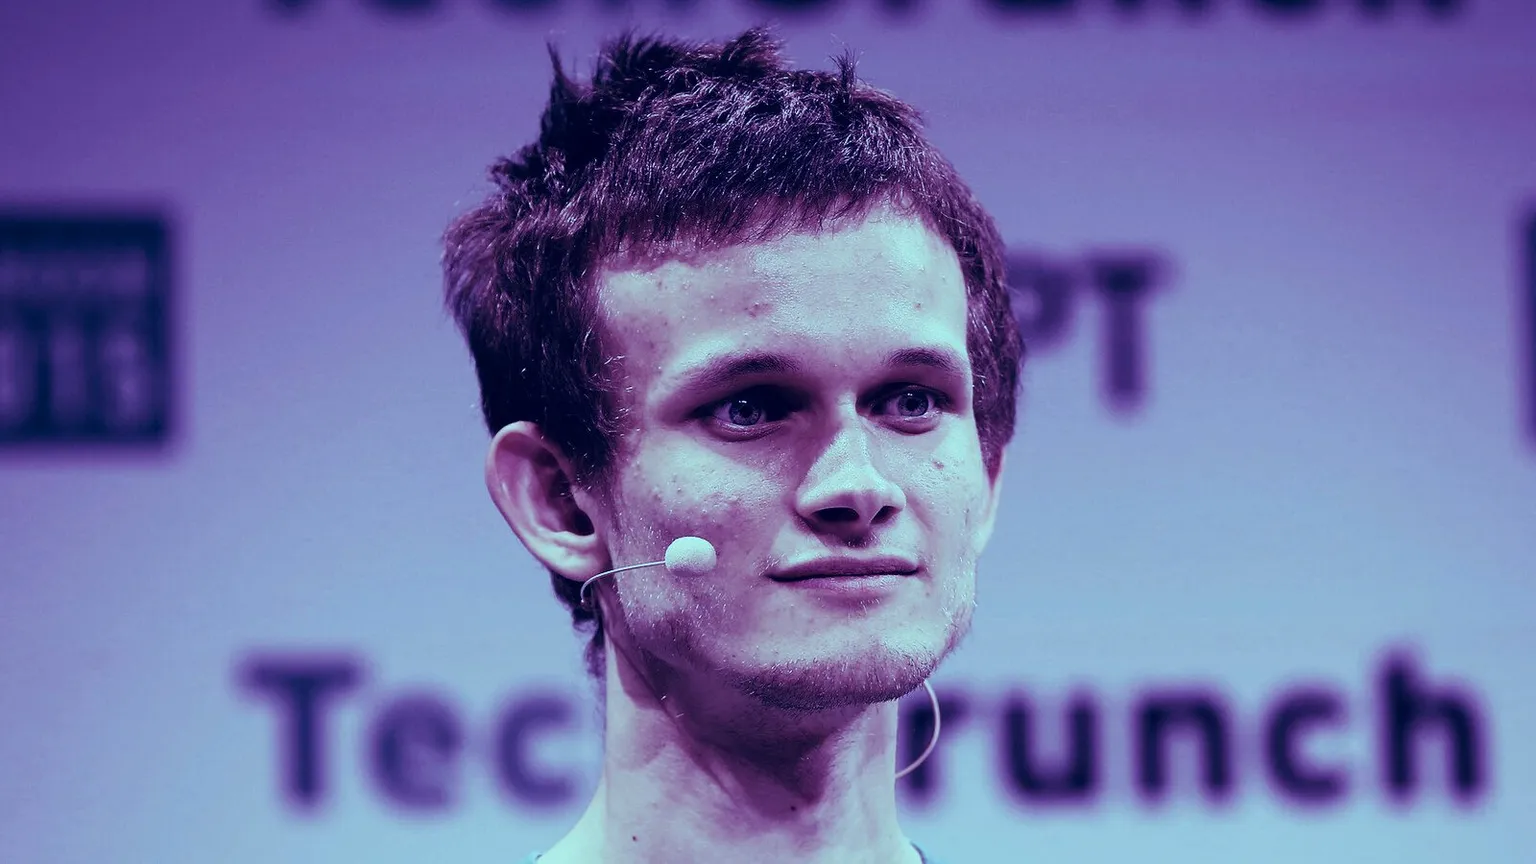 The face of a man for whom money means nothing. PHOTO CREDIT: TechCrunch on Flickr 